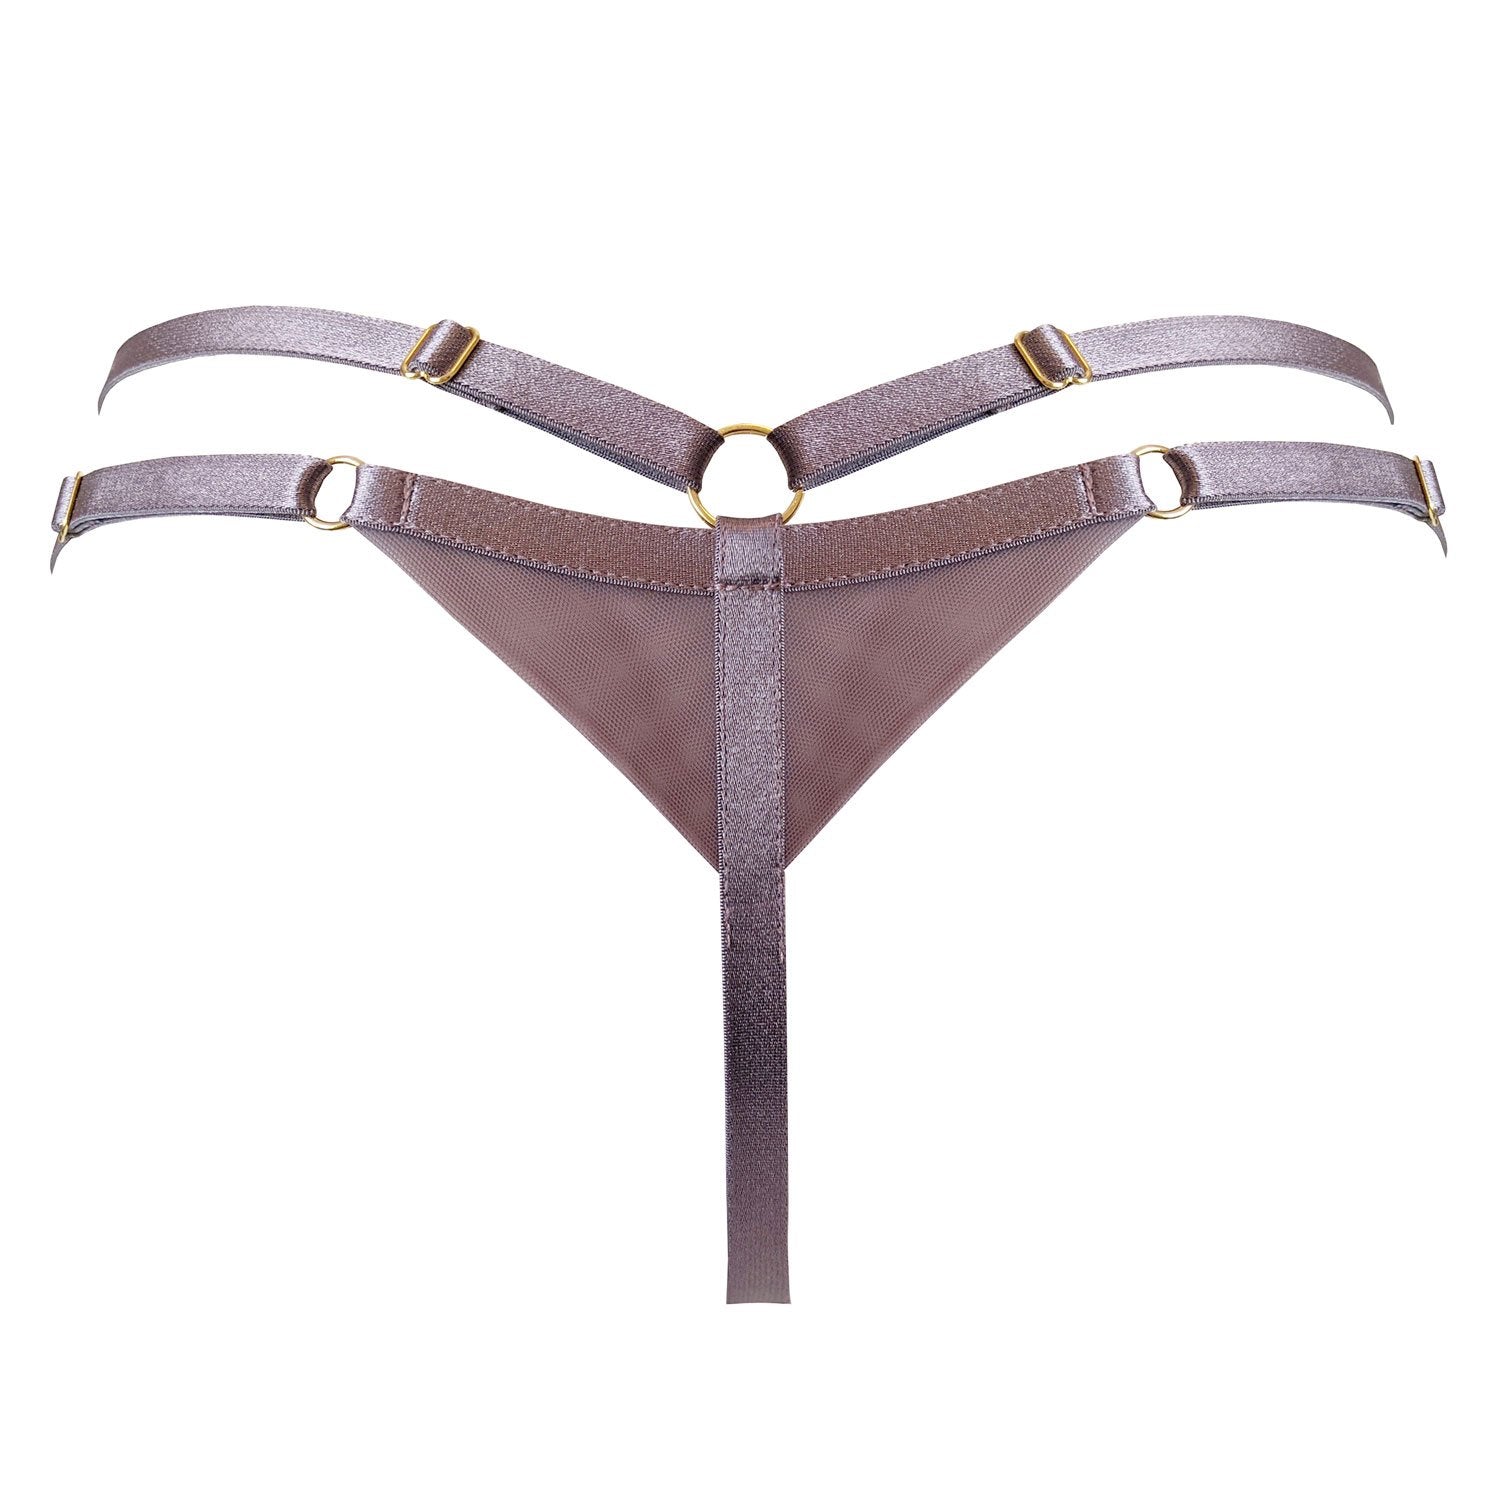 Bordelle Ula strap thong tundra new colourway of a new classic, sheer mesh and satin silk elastic multistrap gstring